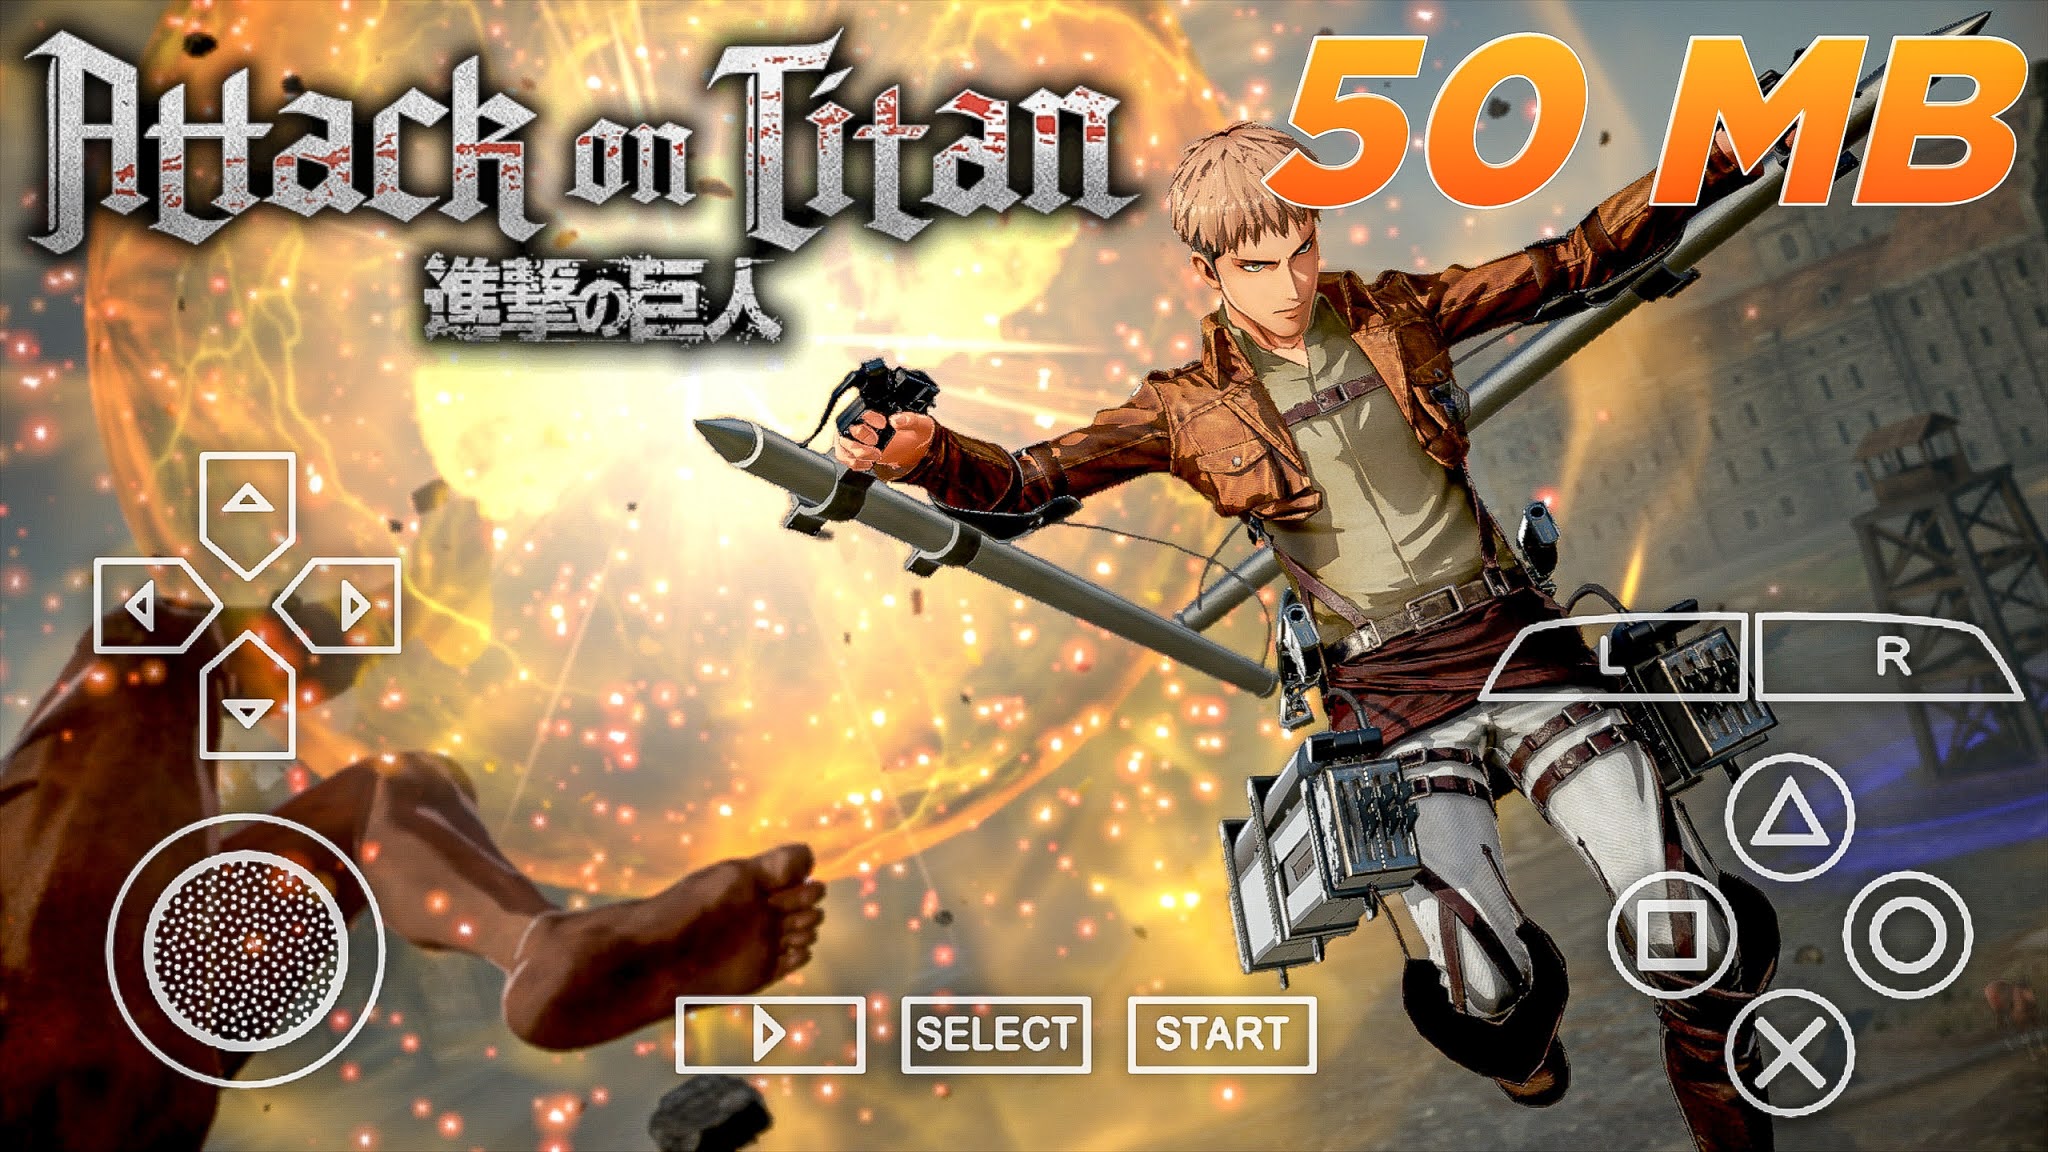 aot tribute game free download